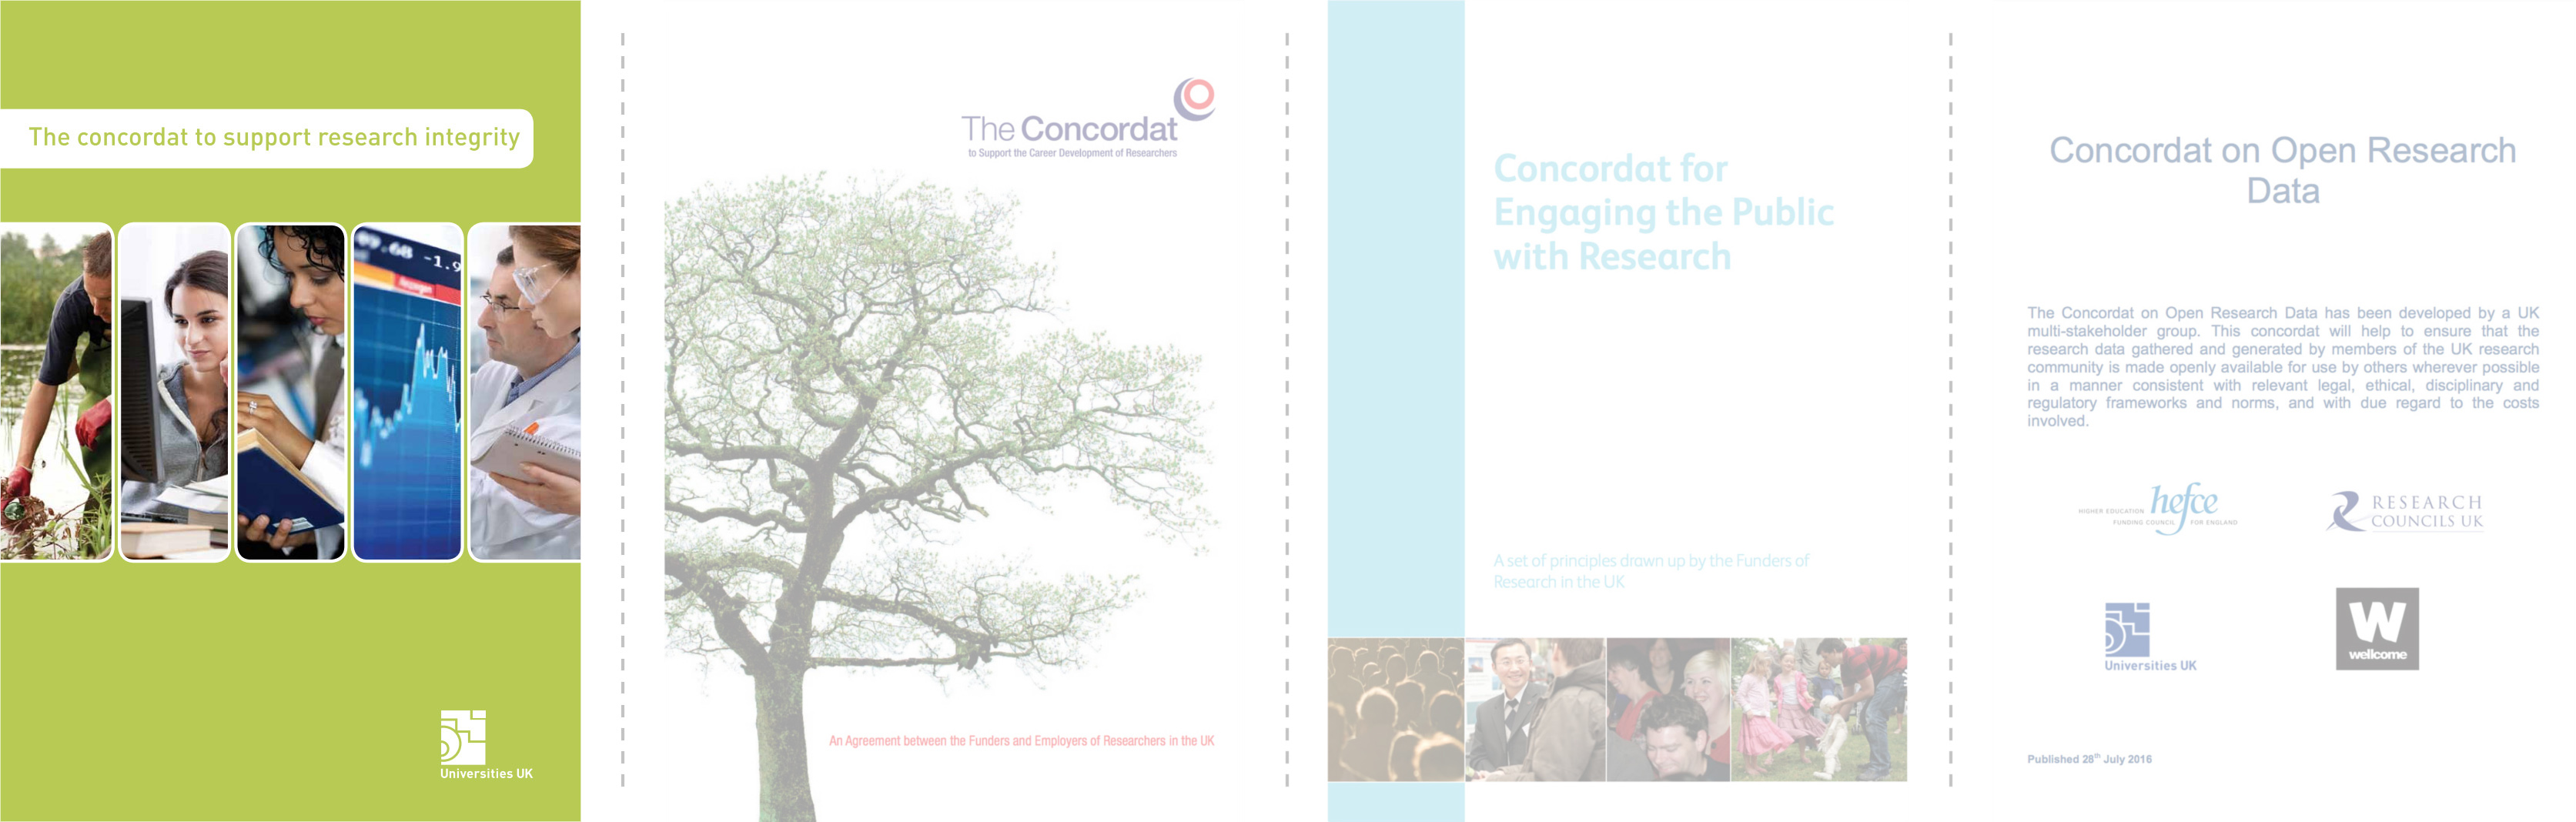 The Concordat to Support Research Integrity